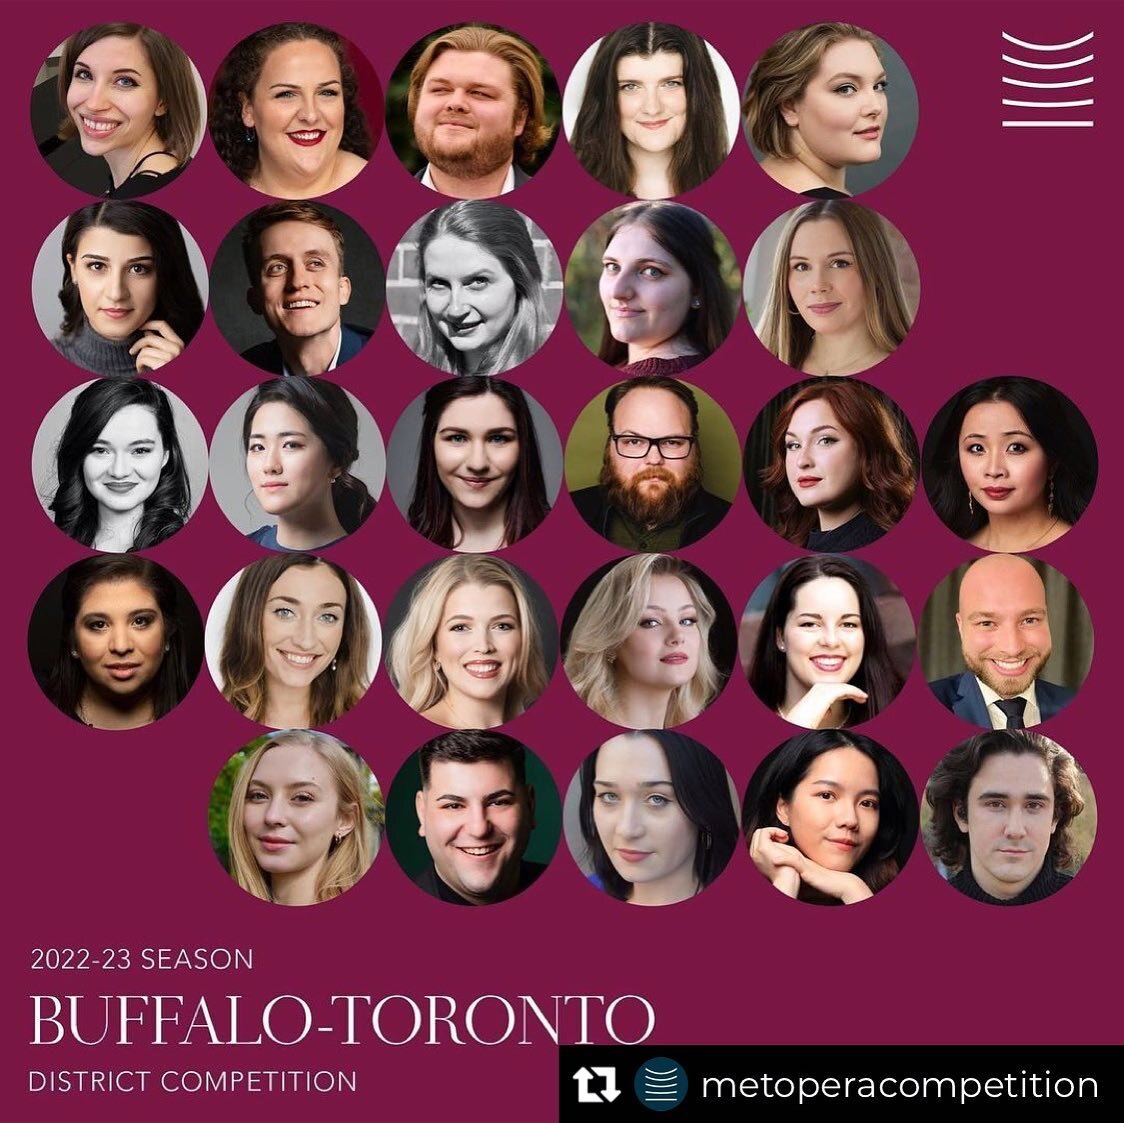 Excited to be back competing @metoperacompetition this weekend with so many sweet Canadian singers and friends!
.
.
.

ANNOUNCING OUR BUFFALO-TORONTO DISTRICT SINGERS✨

Best of luck to all those competing Saturday, January 7!

Michaela Chiste, Sopran